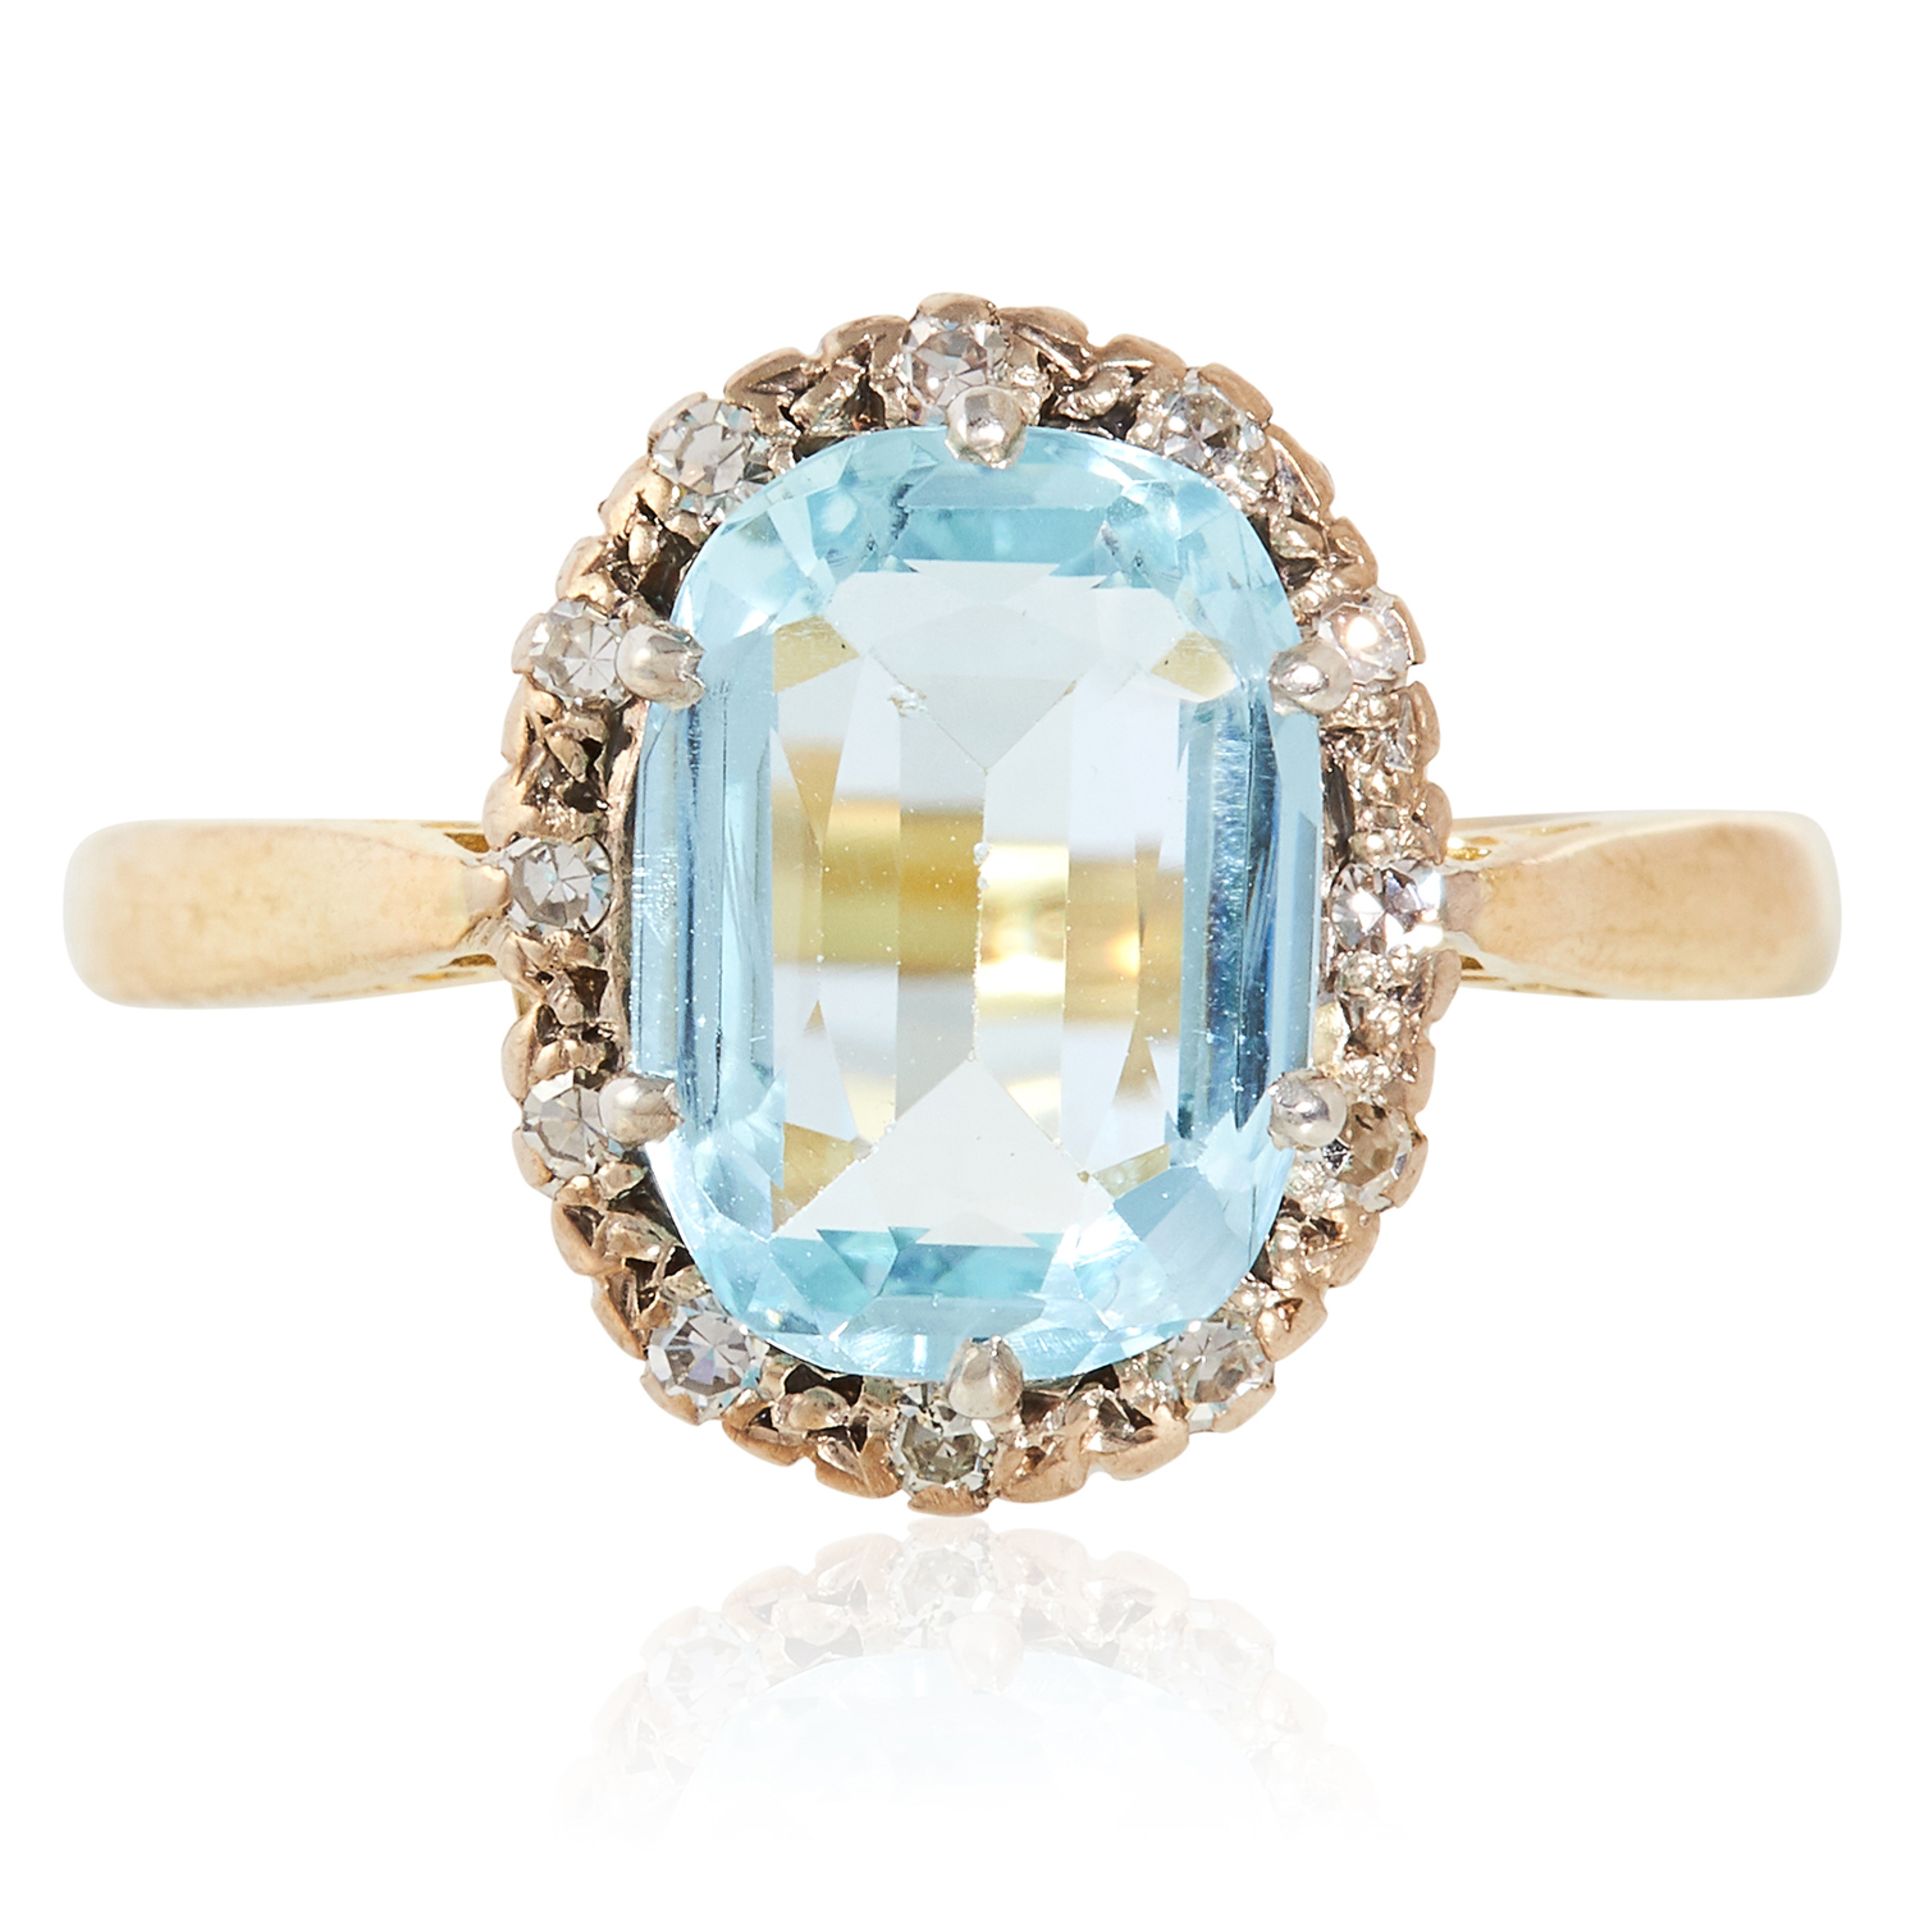 AN AQUAMARINE AND DIAMOND CLUSTER RING in yellow gold, set with a cushion cut aquamarine of